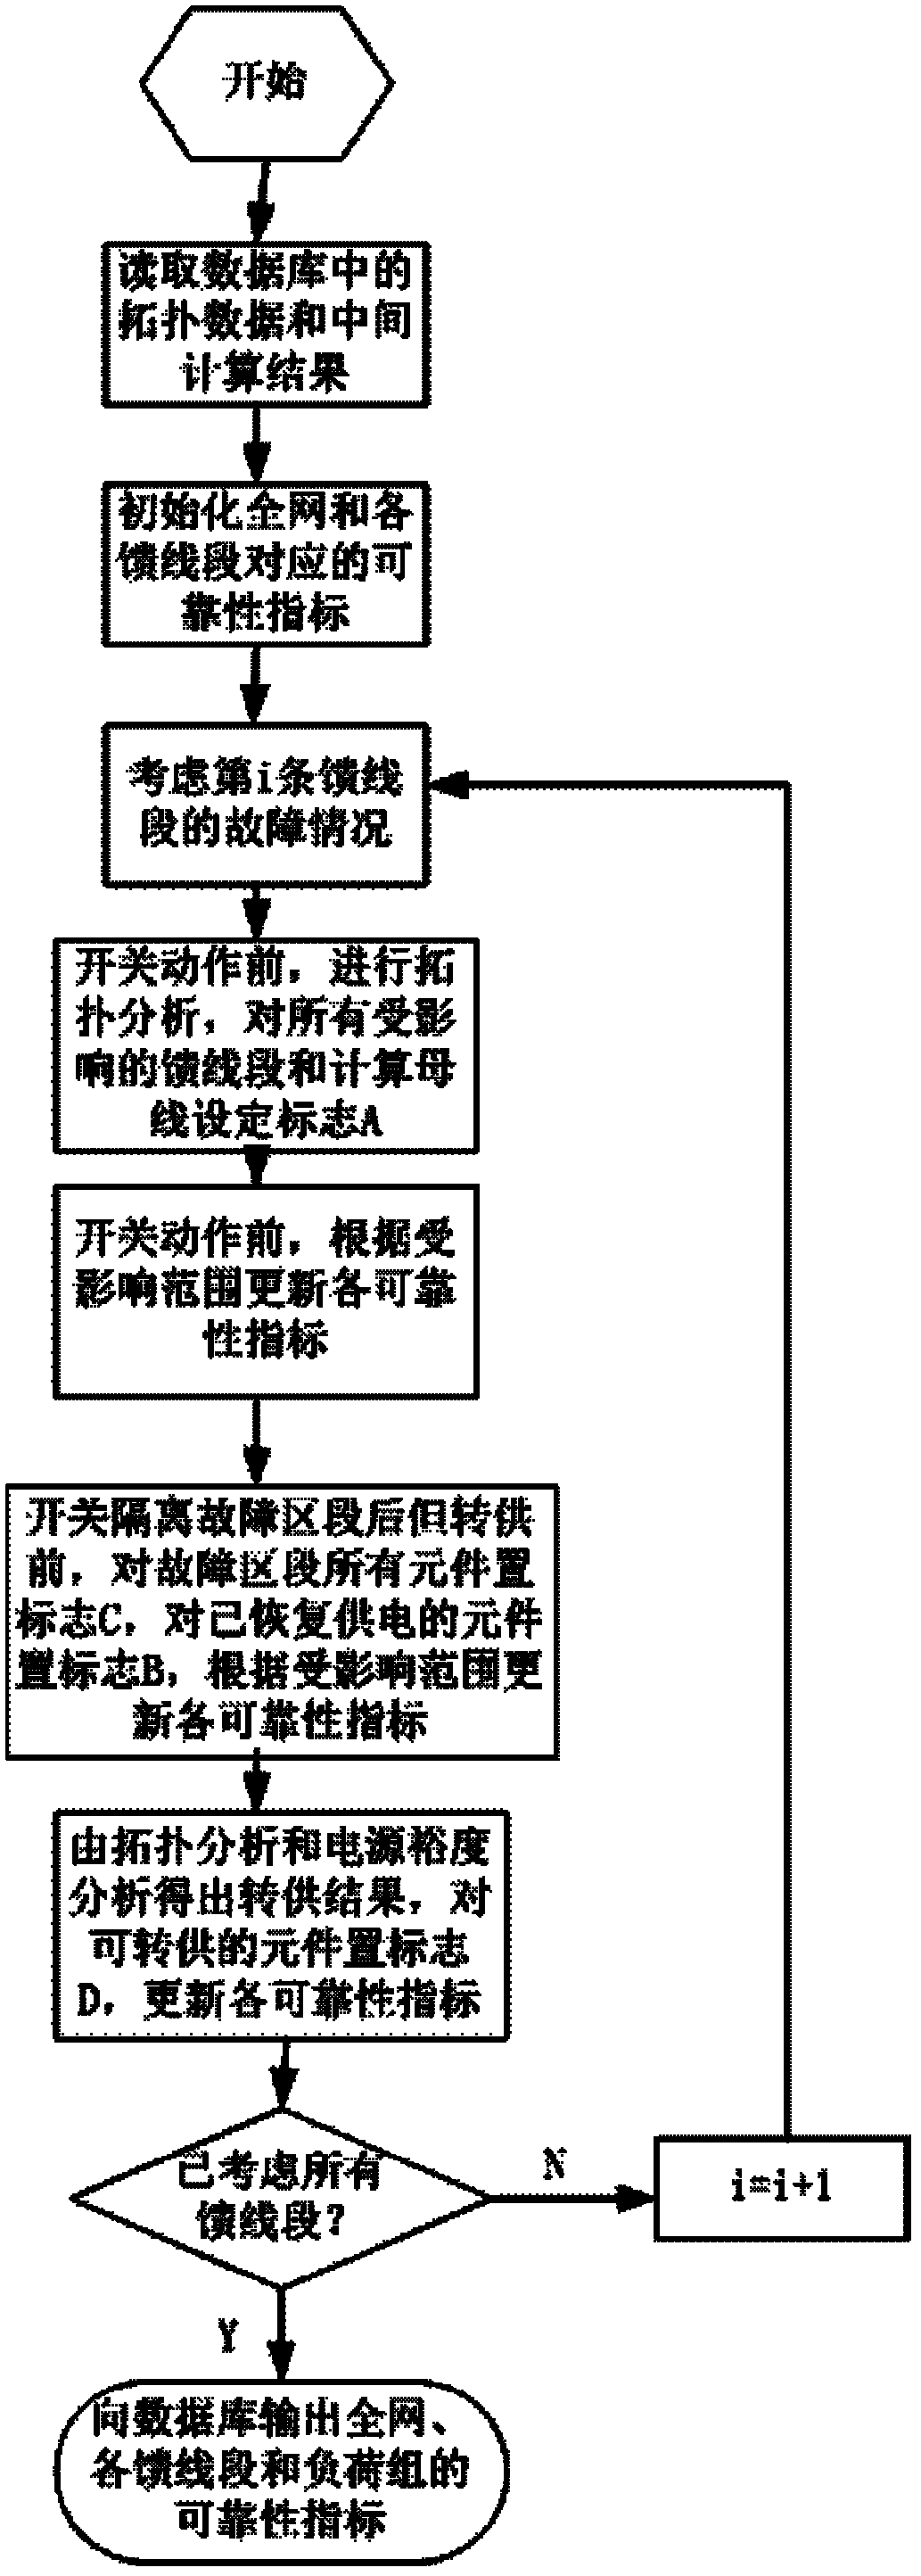 State labeling method for estimating reliability of distribution network